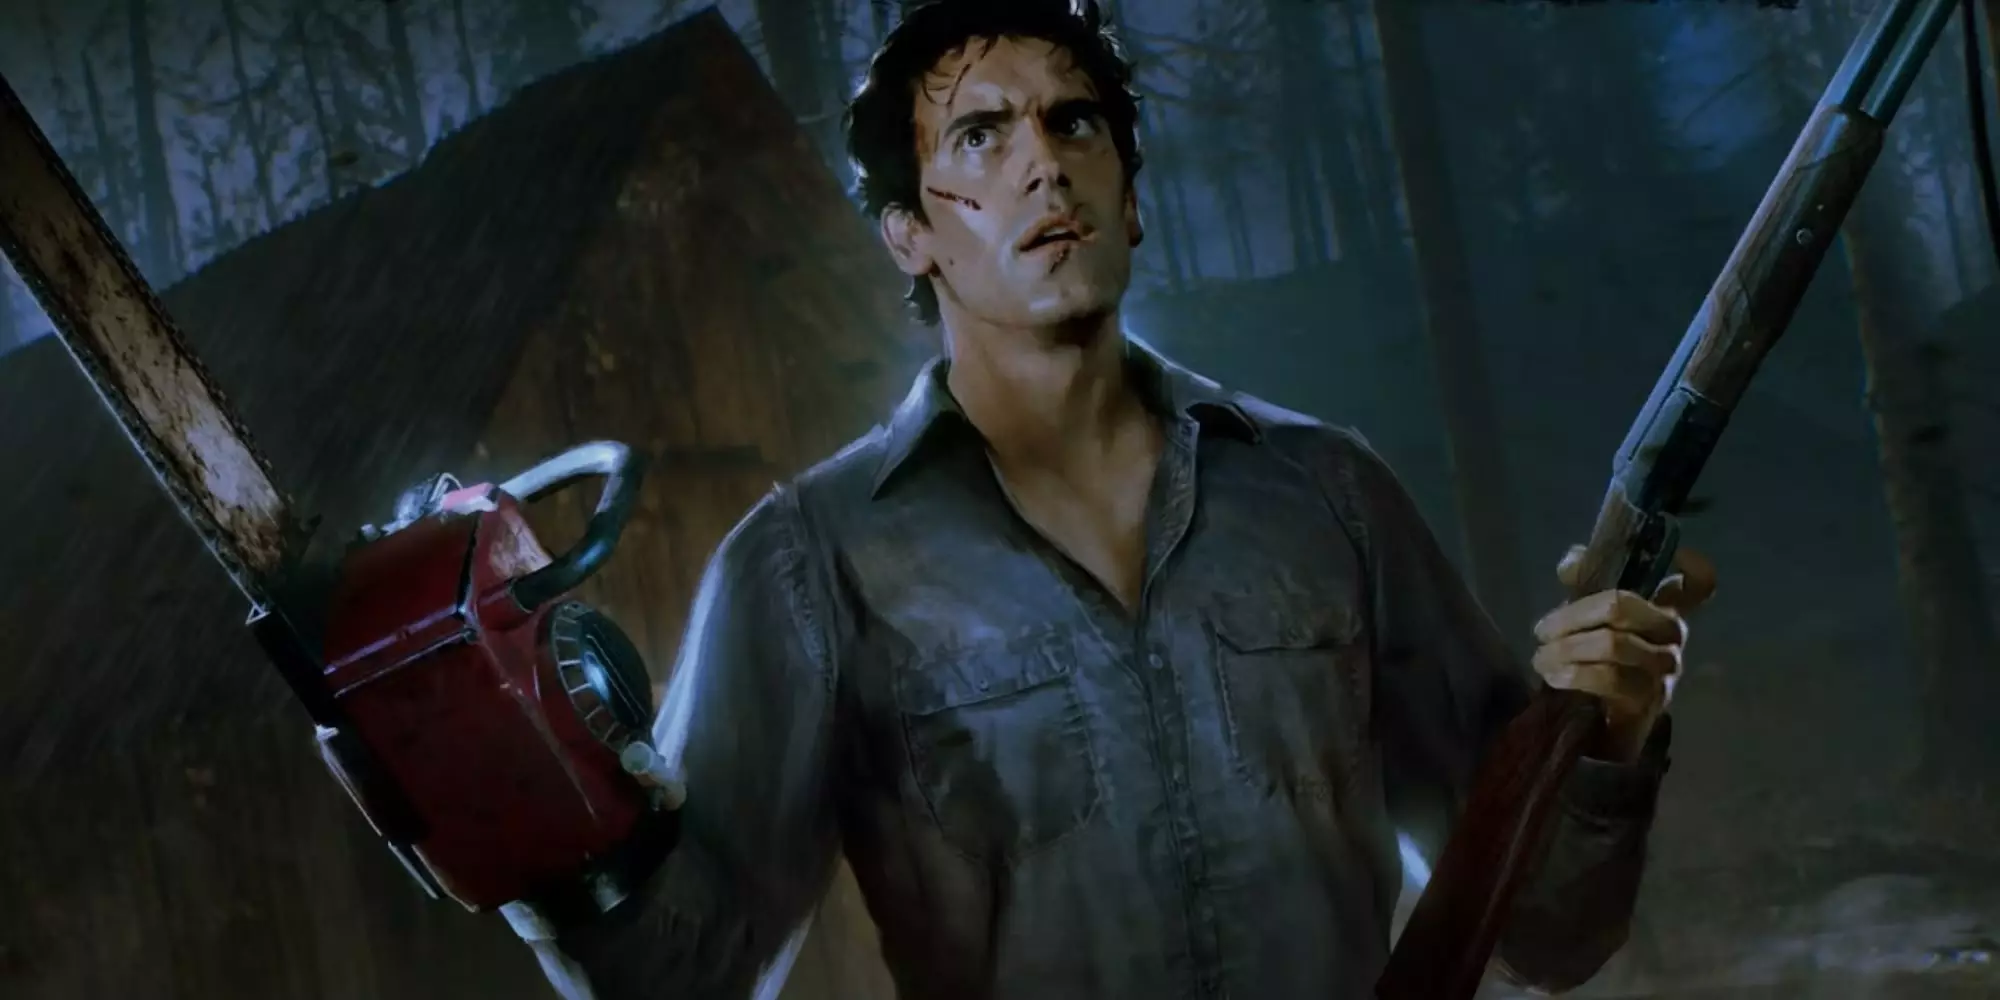 His character in the movie Evil Dead with a gun in one hand and a chainsaw in the other